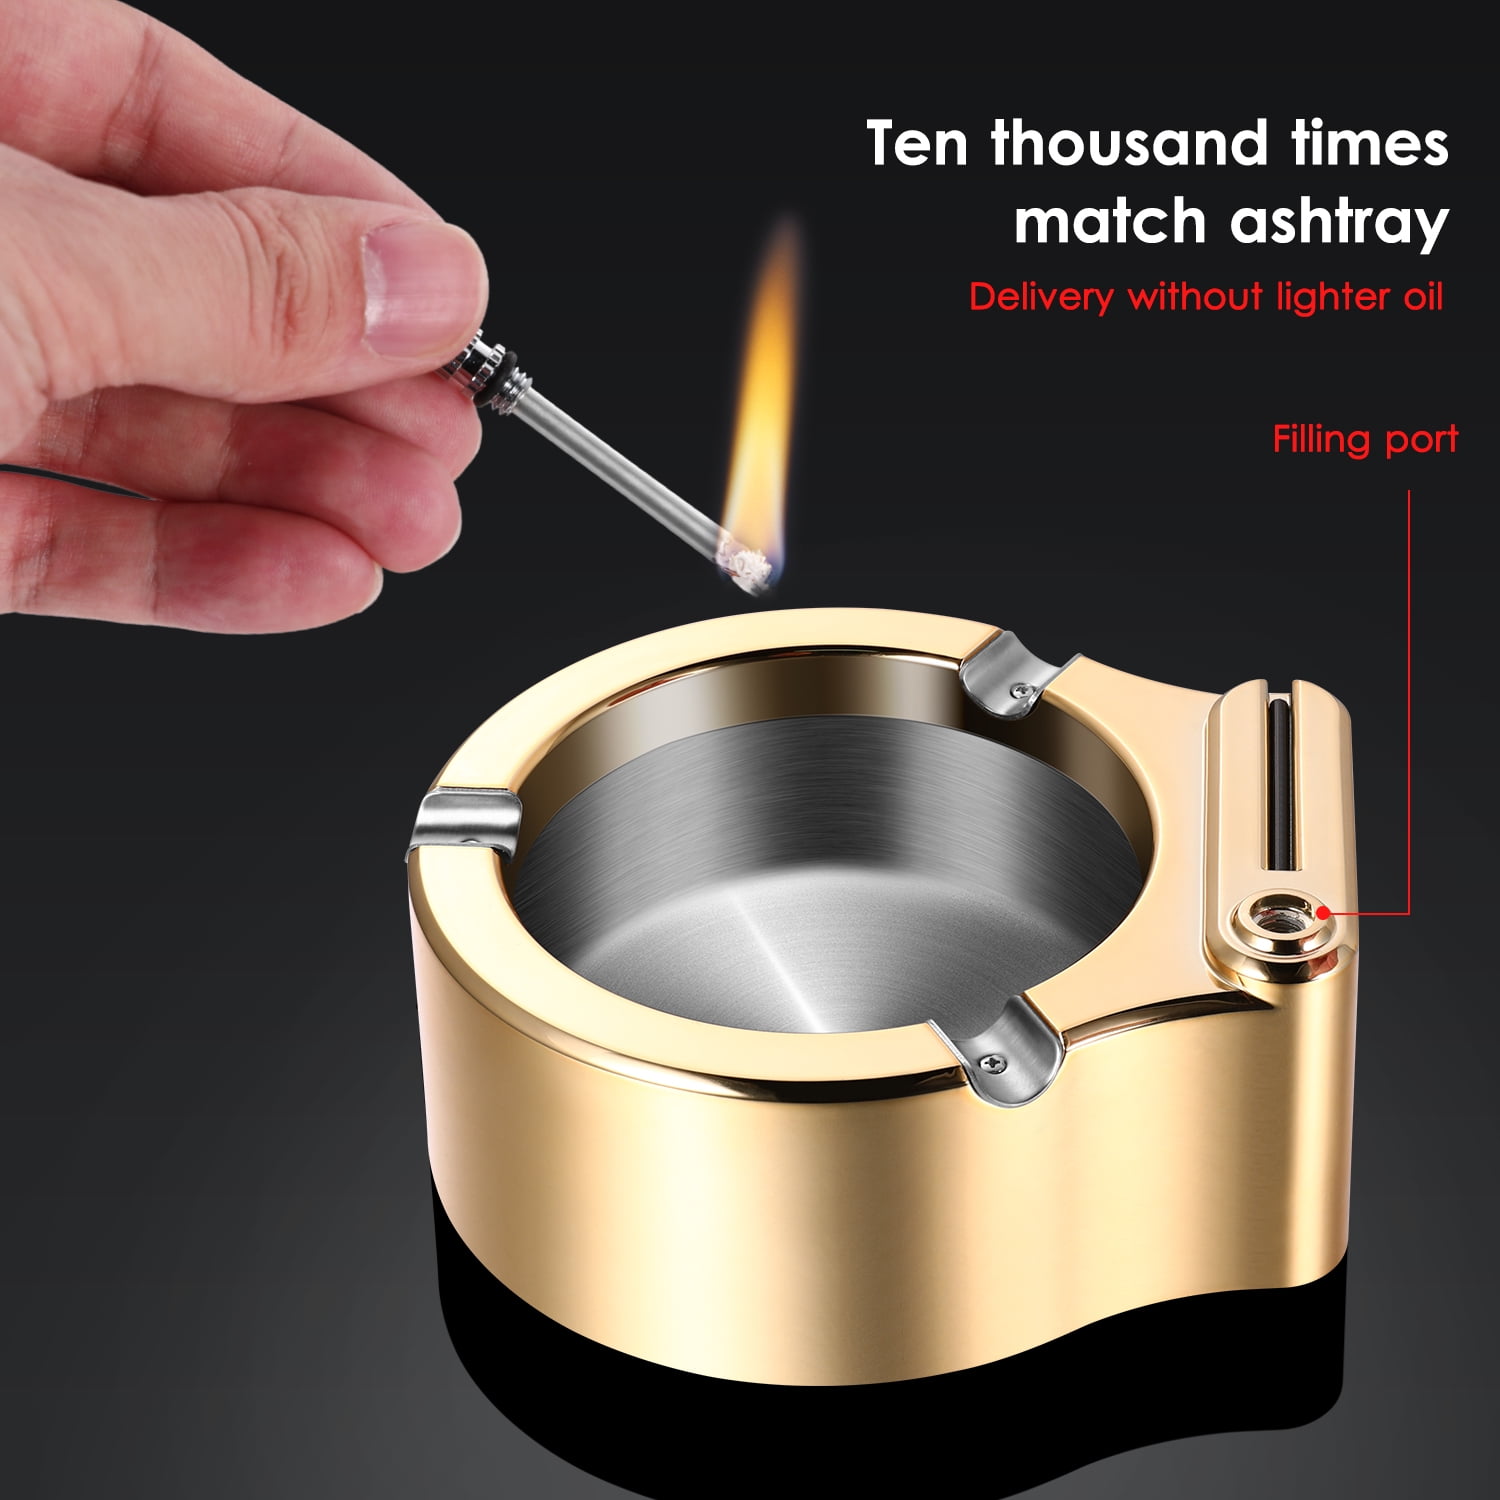 Ashtray Cigar Ashtray Stainless Steel Ashtray Ten Thousand Match Lighter Men Smokers Gifts Simple Stylish Indoor Outdoor Patio Home Office Use Blue Ice/Black/Gold Black